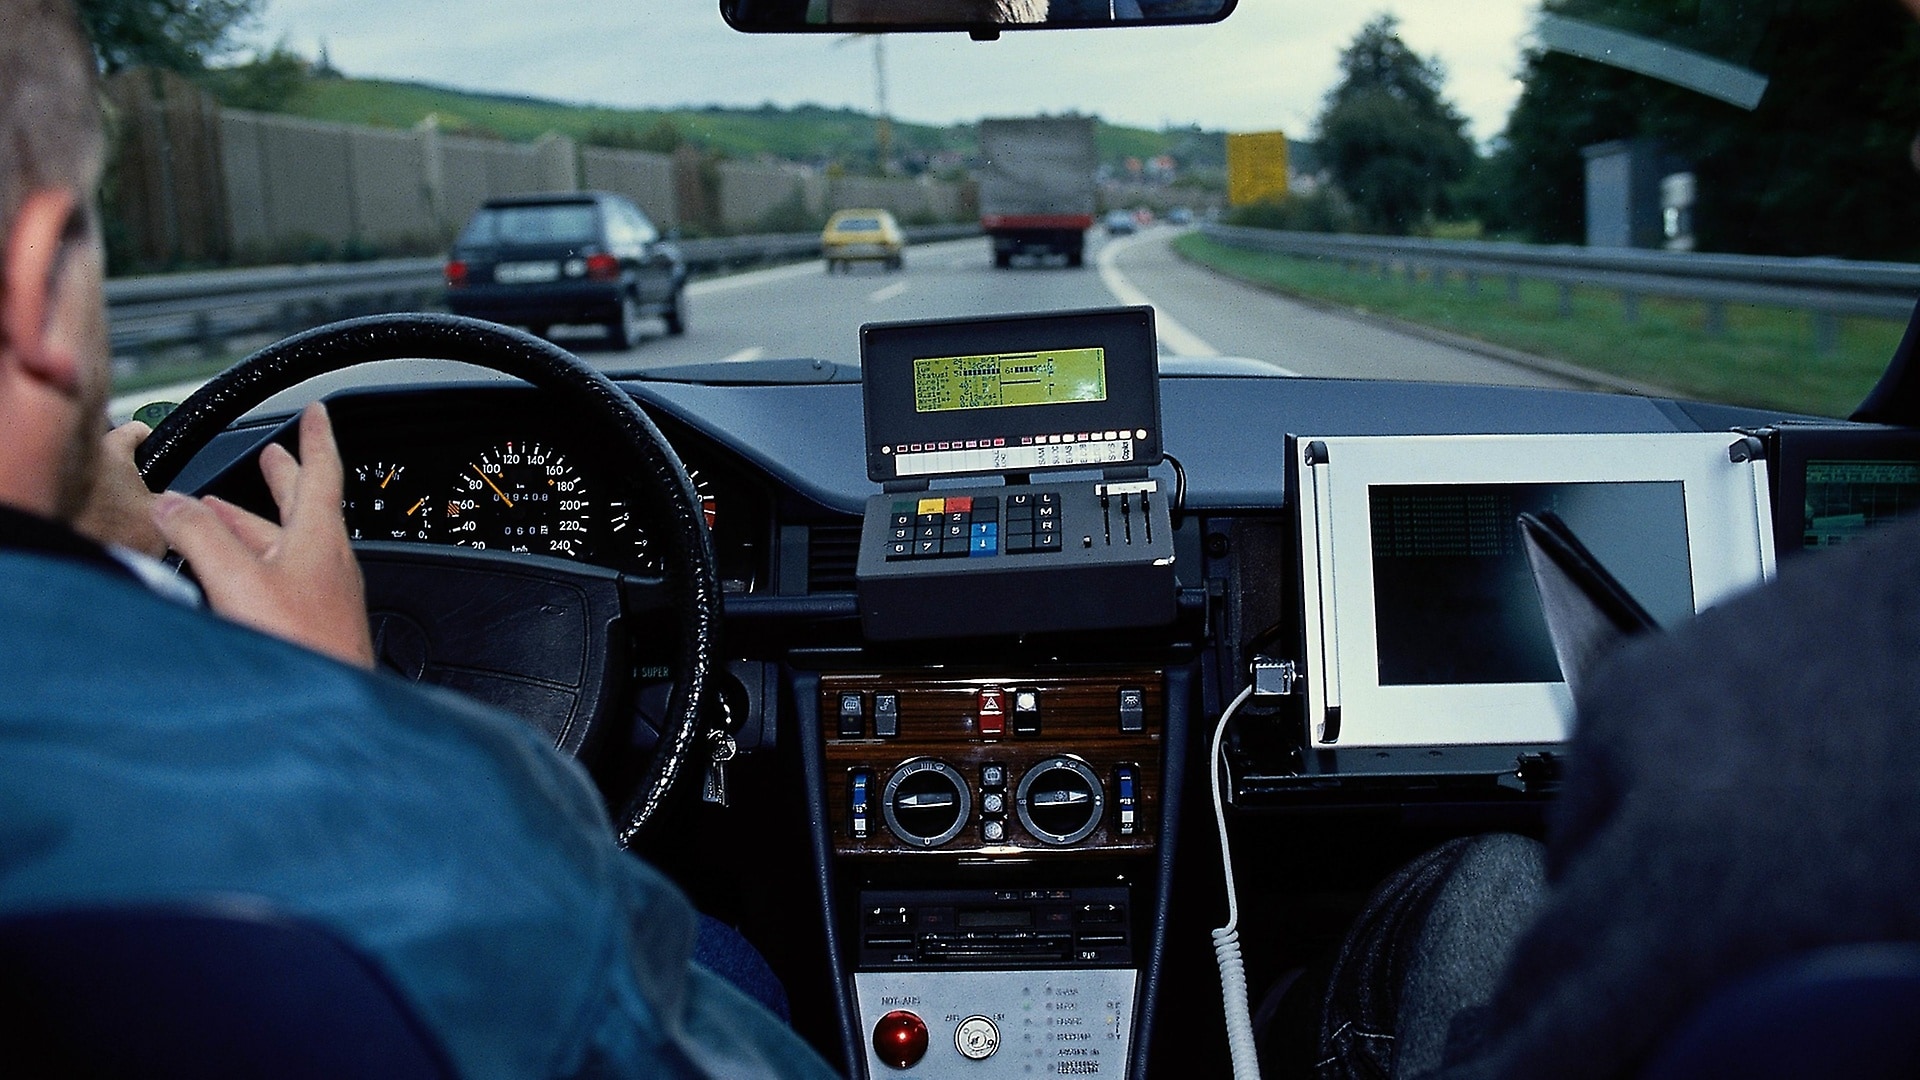 Working towards traffic without accidents: adaptive cruise control in testing as part of the PROMETHEUS research project (1986 to 1994).